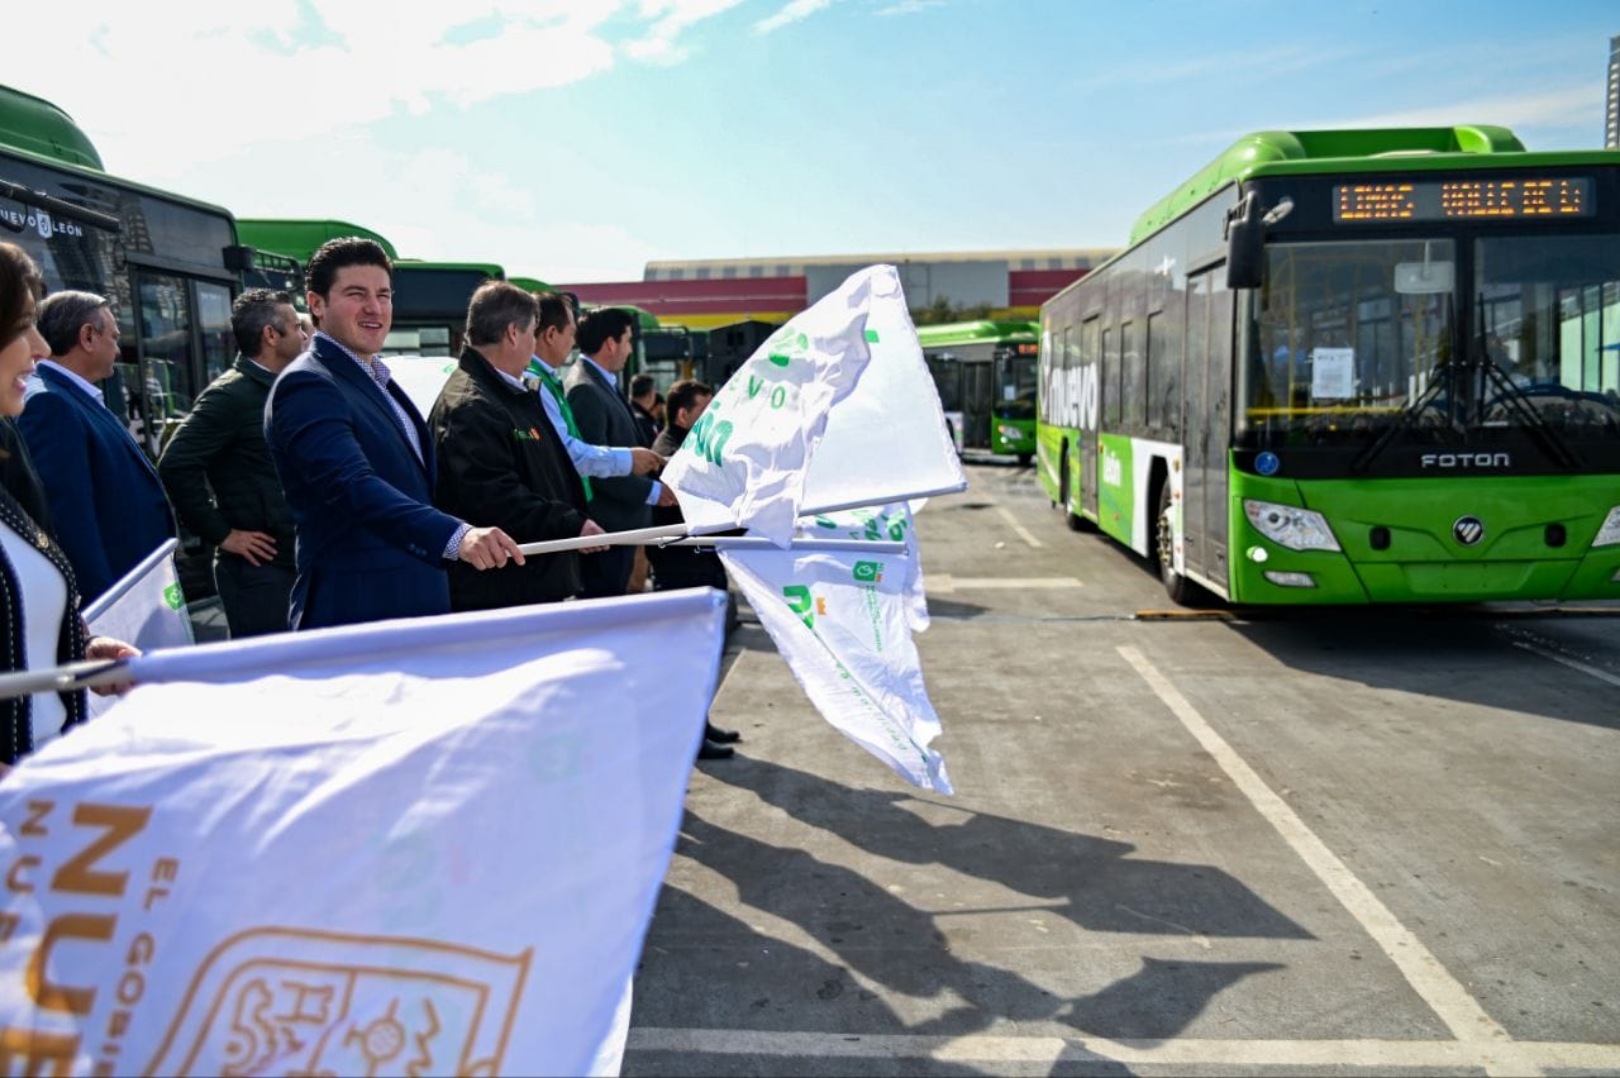 FOTON delivers the first 142 buses in Nuevo Leon